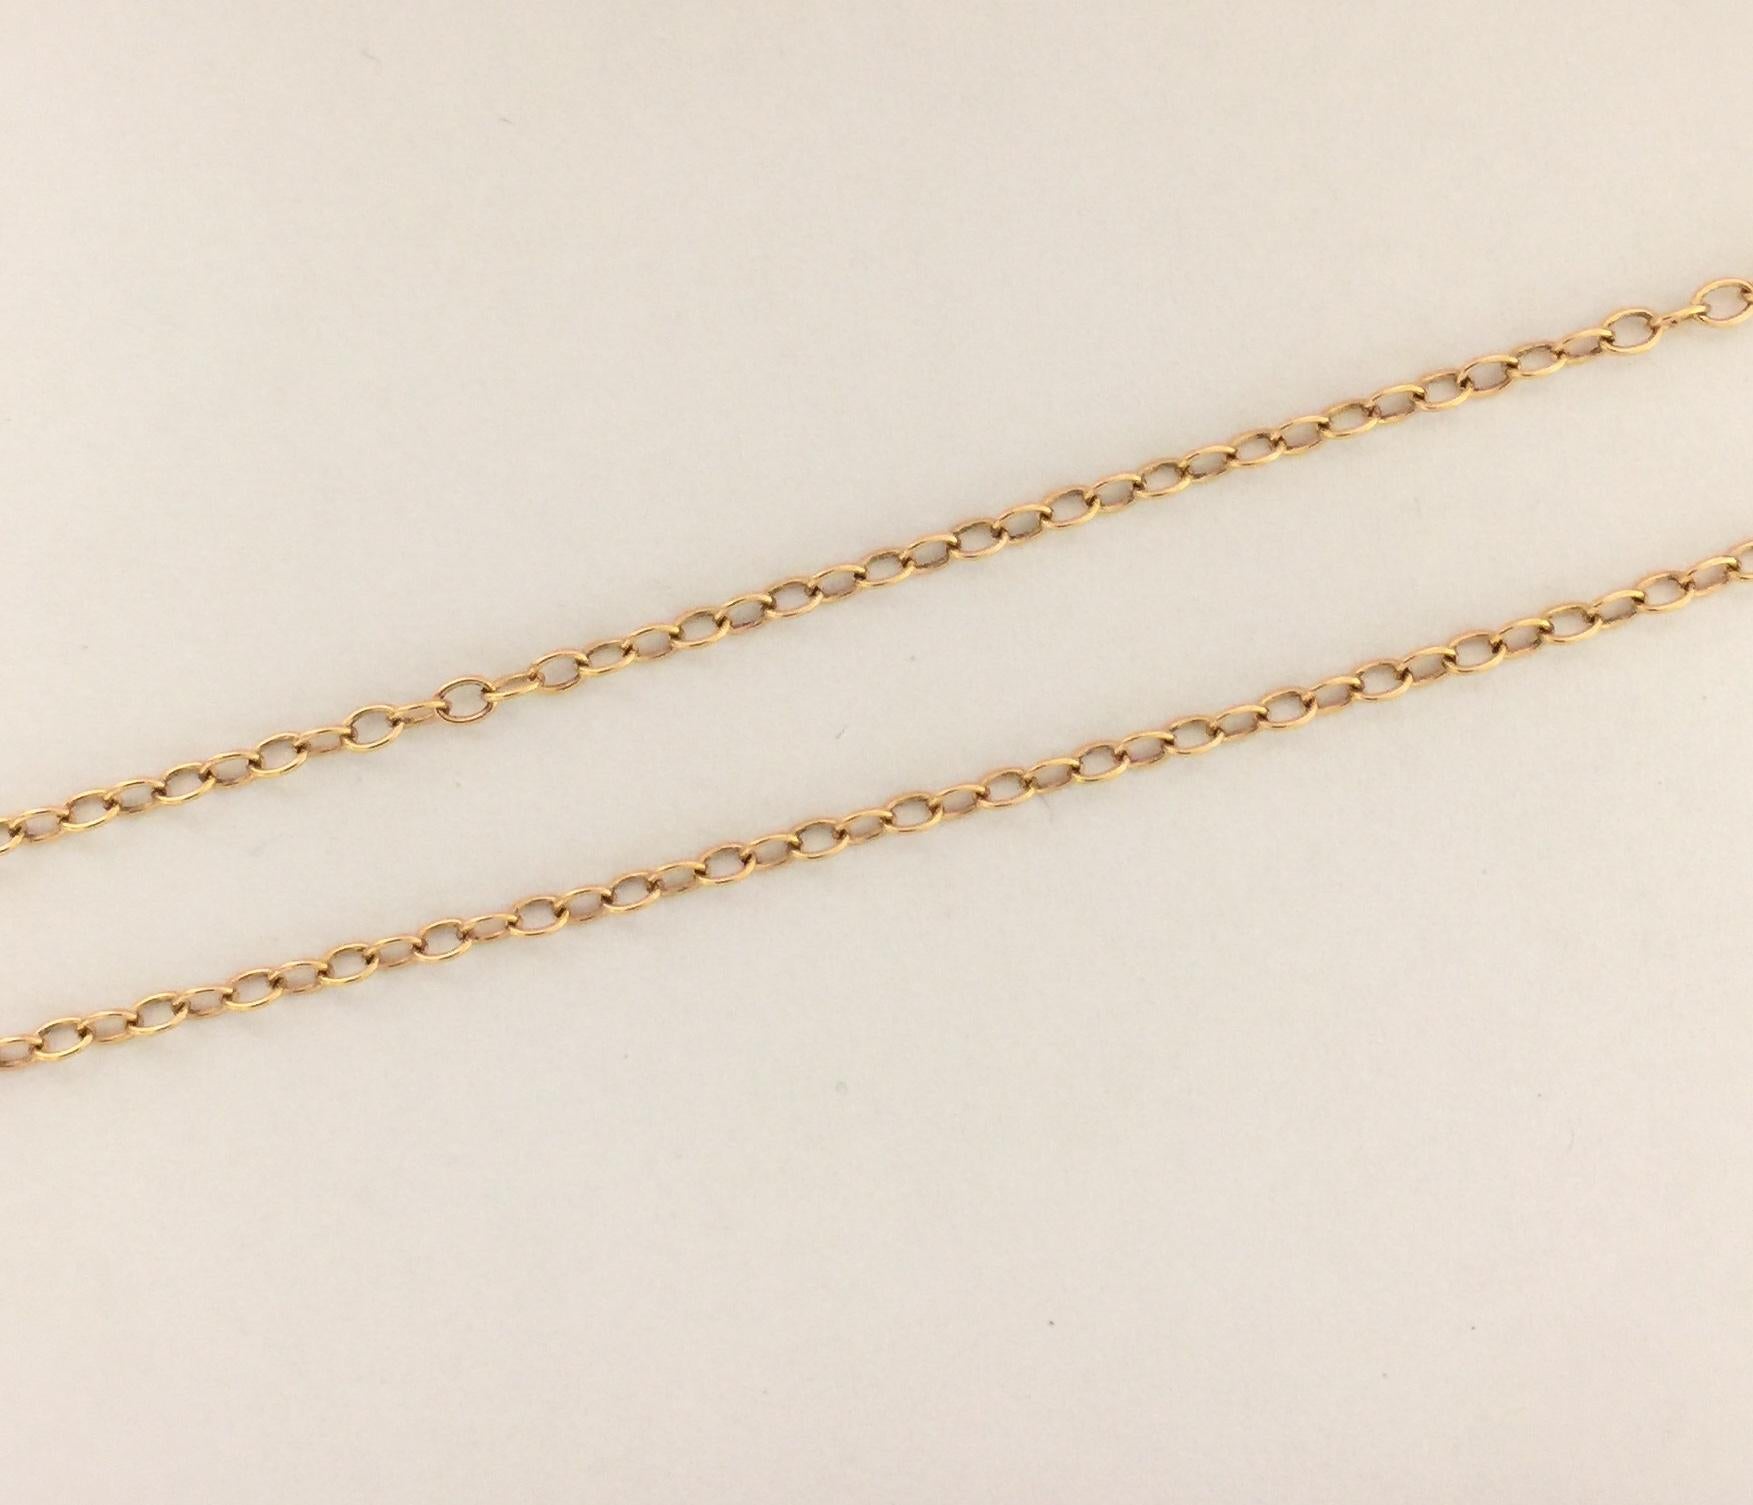 Faberge Gold Chain.
18k Yellow Gold 
length 16 inches 
F2049